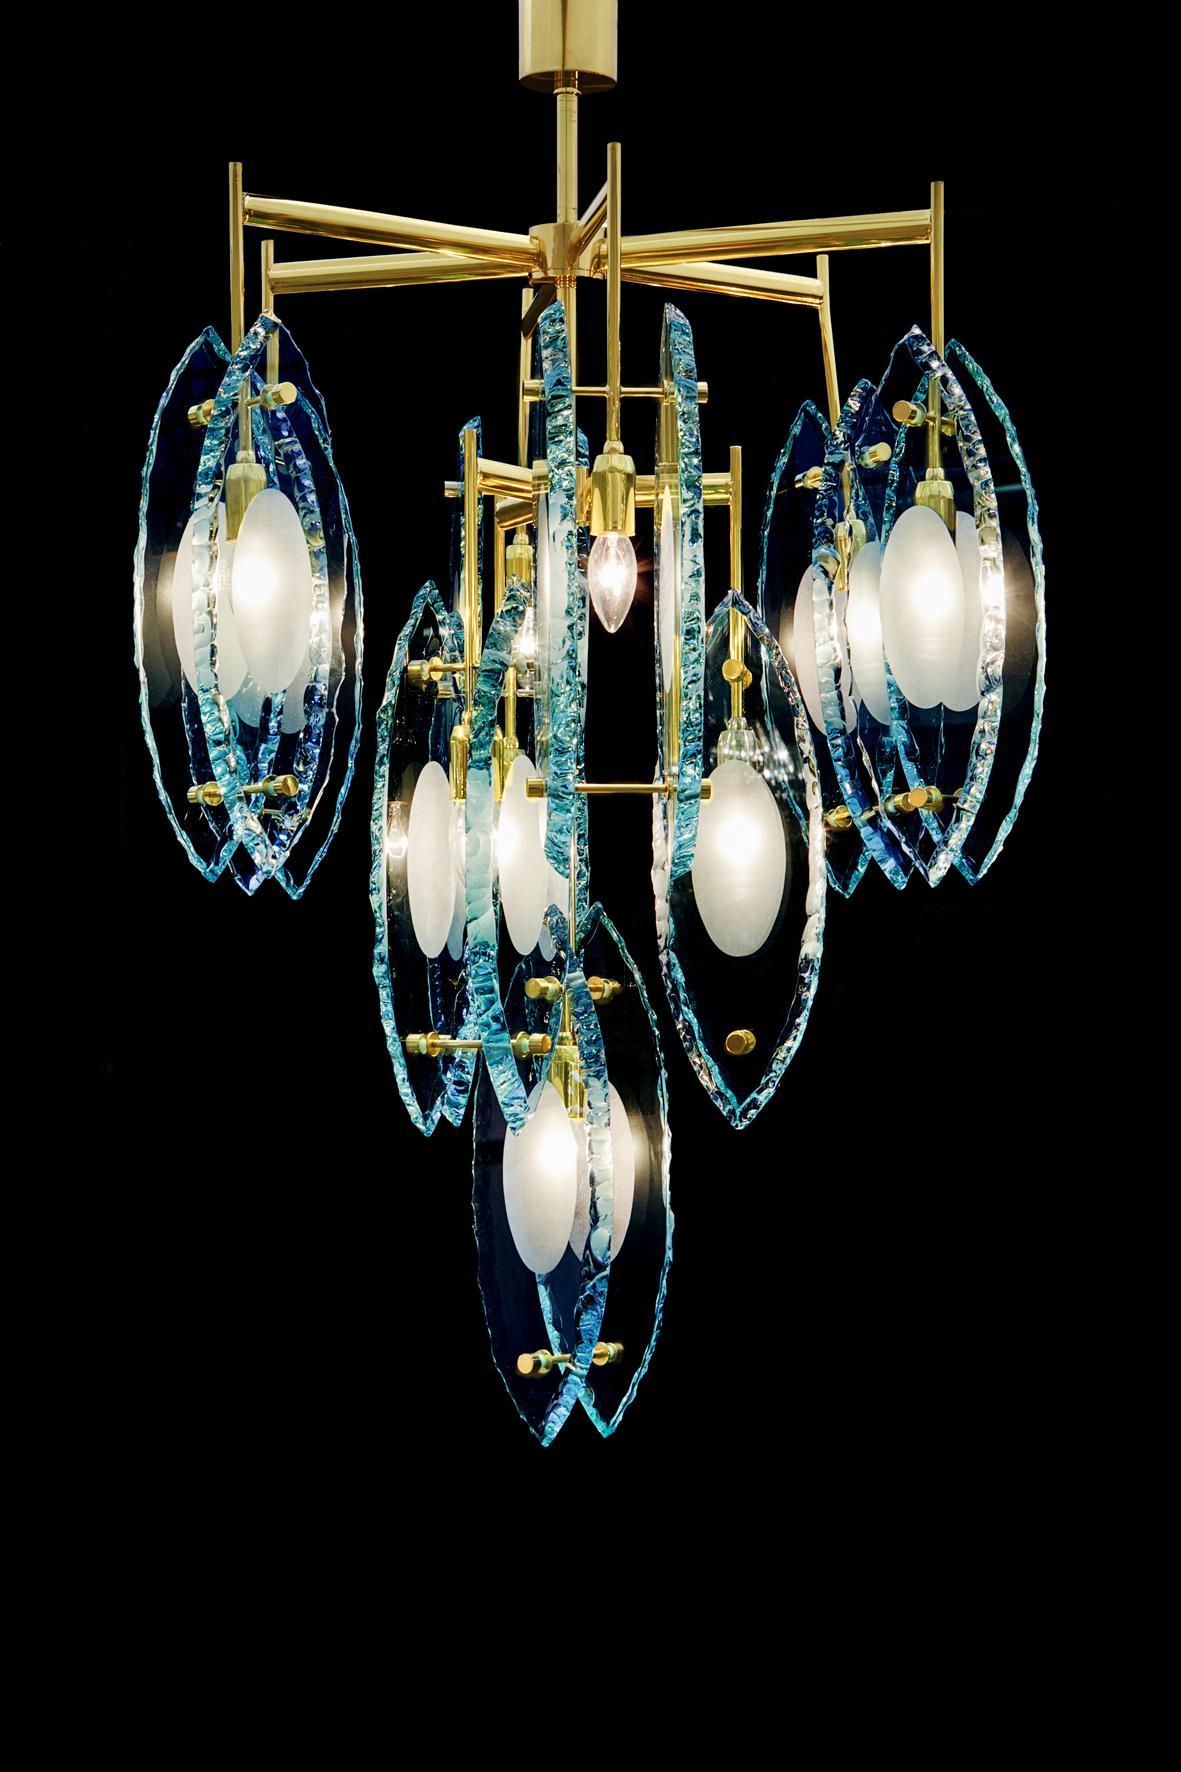 Italian chandelier with thick etched glasses, mounted on polished brass frame, exclusive design by Gianluca Fontana, made in Italy, 21st century.